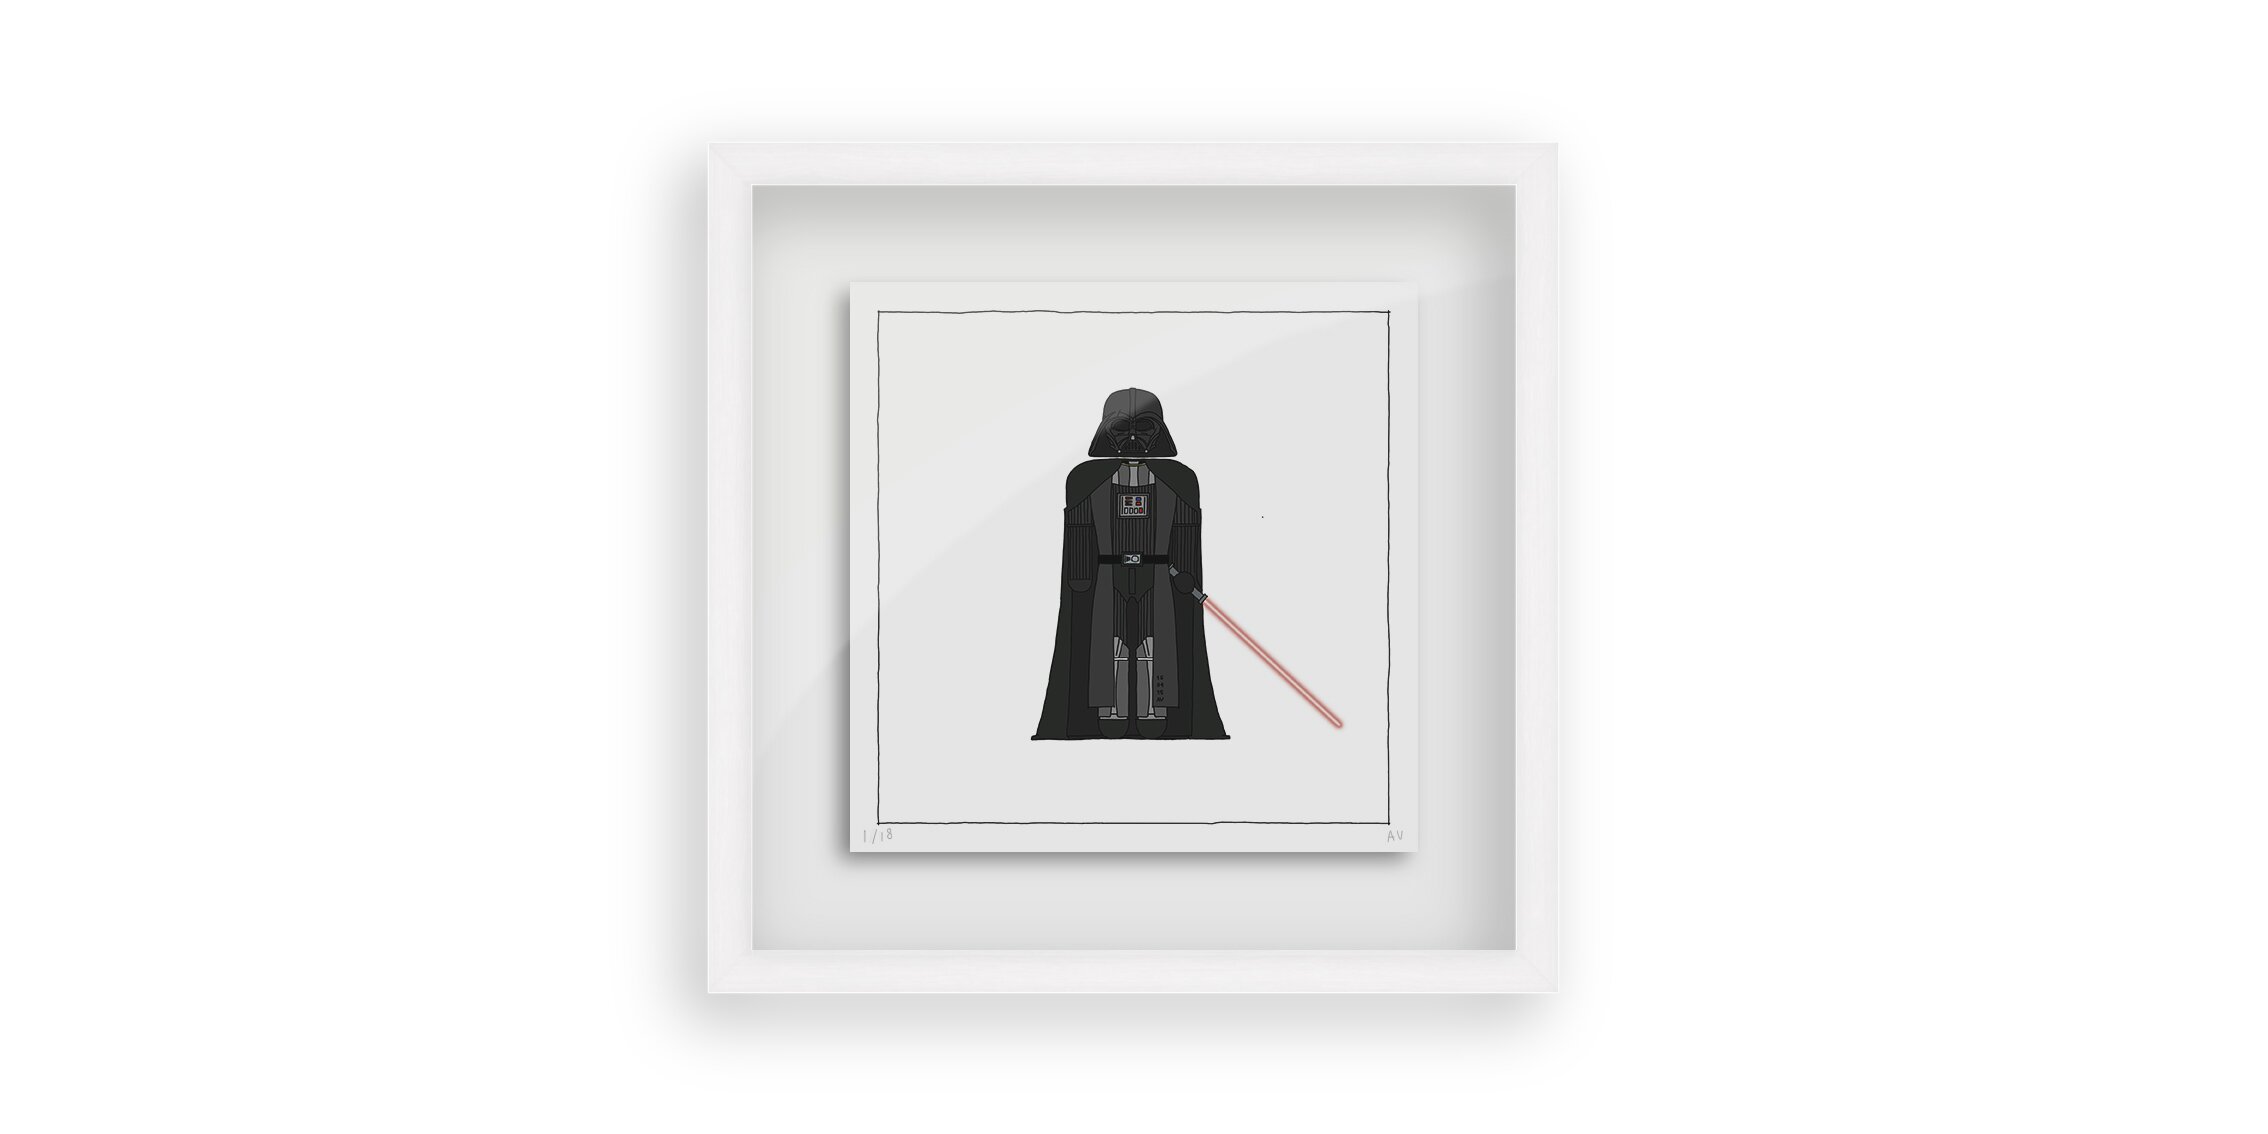 Star Wars Darth Vader - Persona Art Project (Ant Vervoort Hand Drawing)